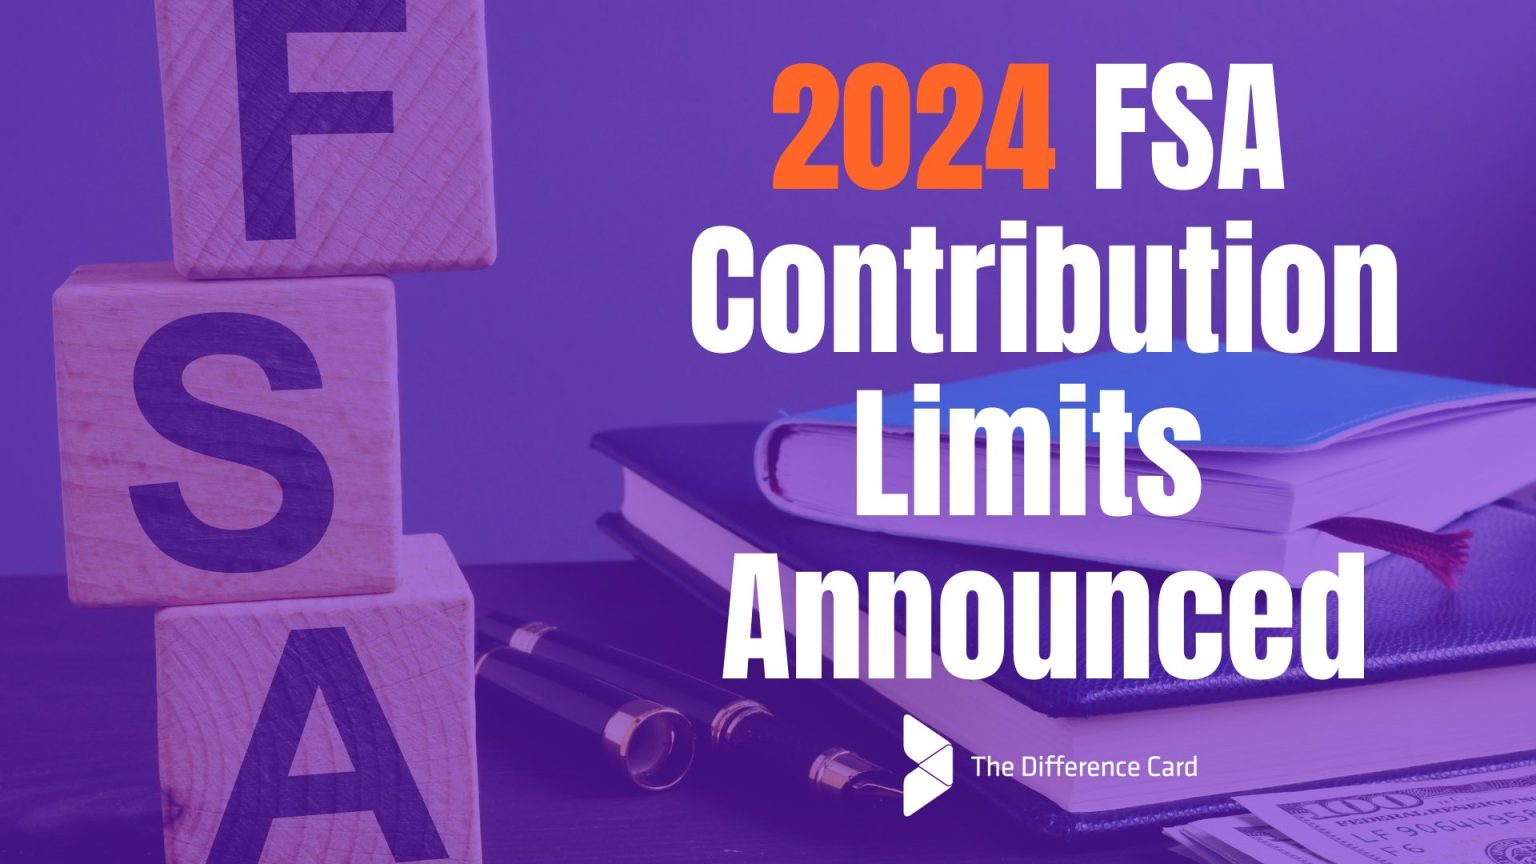 The IRS 2023 Cost of Living Adjustments Changes in 2023